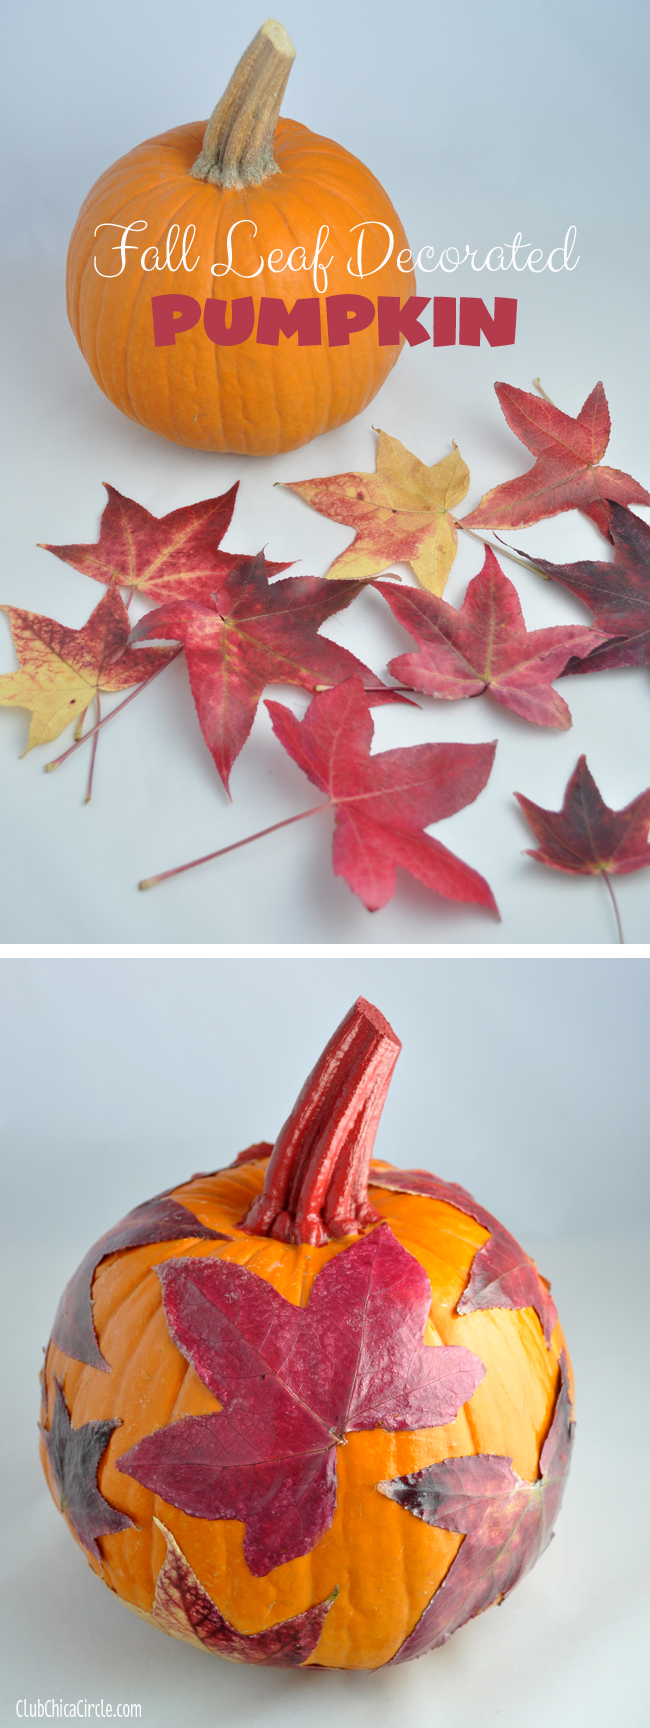 Fall Leaf Decorated Pumpkin craft idea with decoupage and multi-surface paint